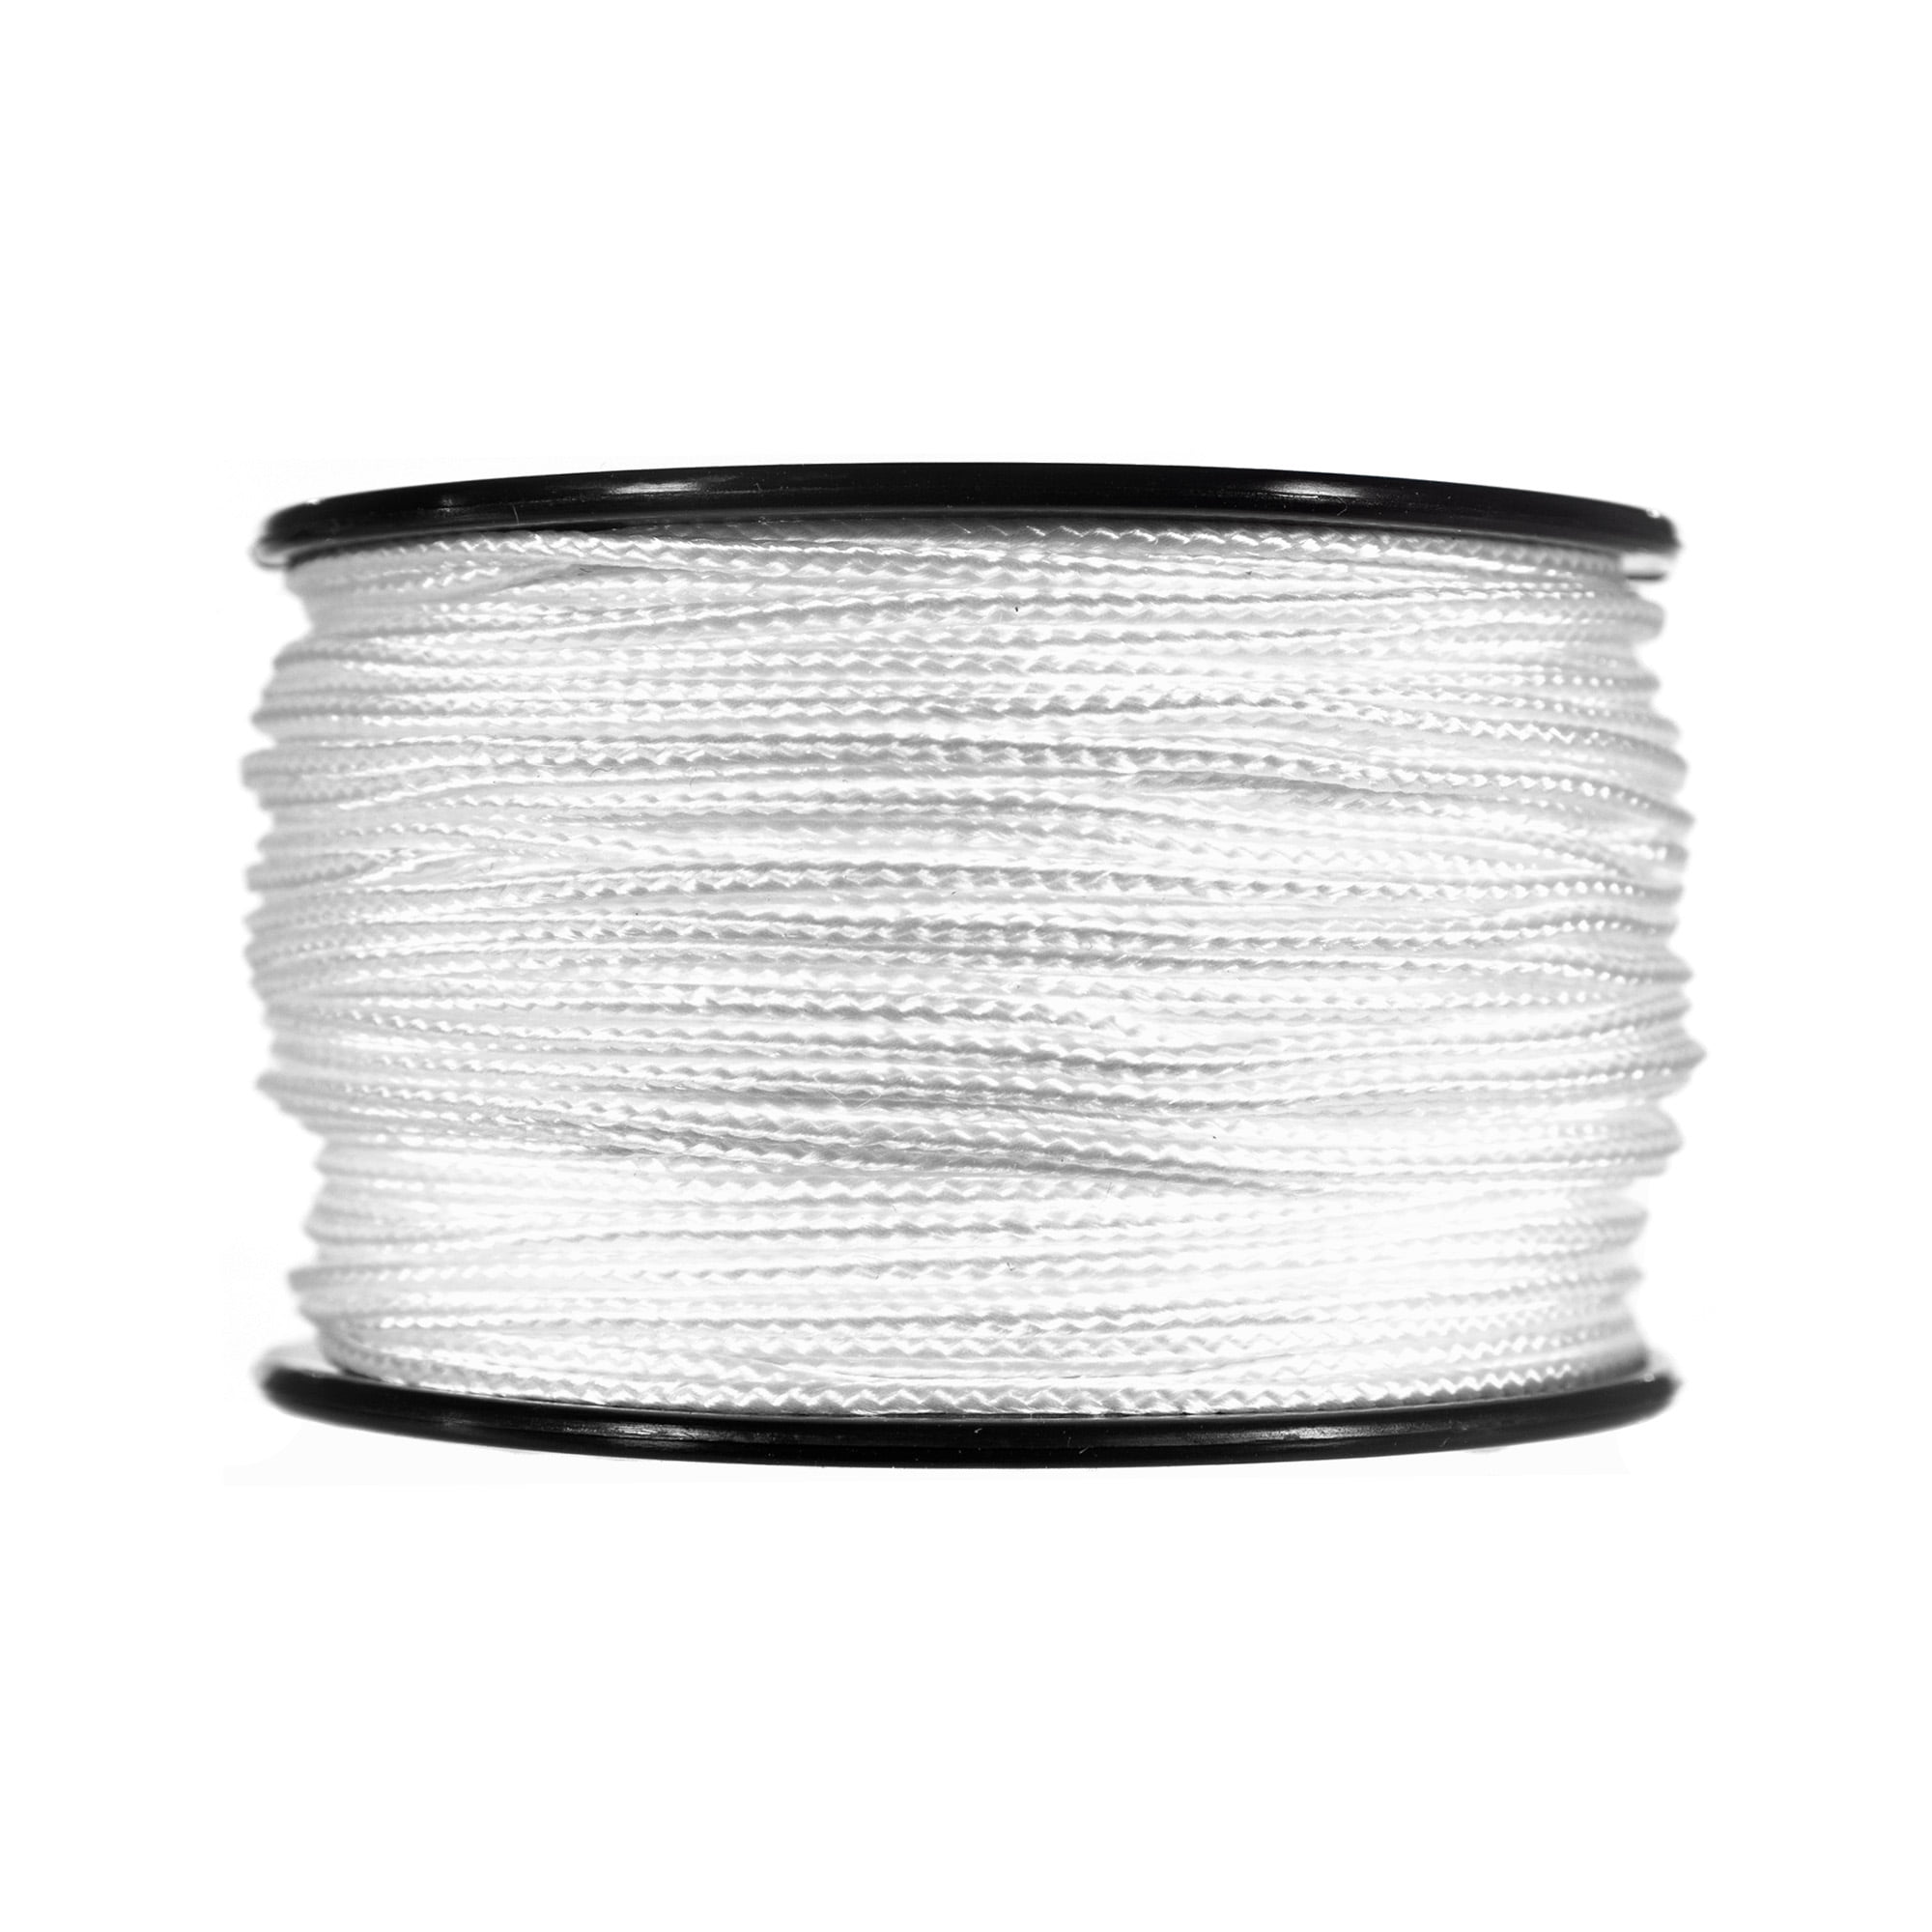  Paracord Planet Micro Cord 1.18mm Diameter 125 Feet Spool of  Braided Cord - Available in a Variety of Colors Made in The USA : Sports &  Outdoors